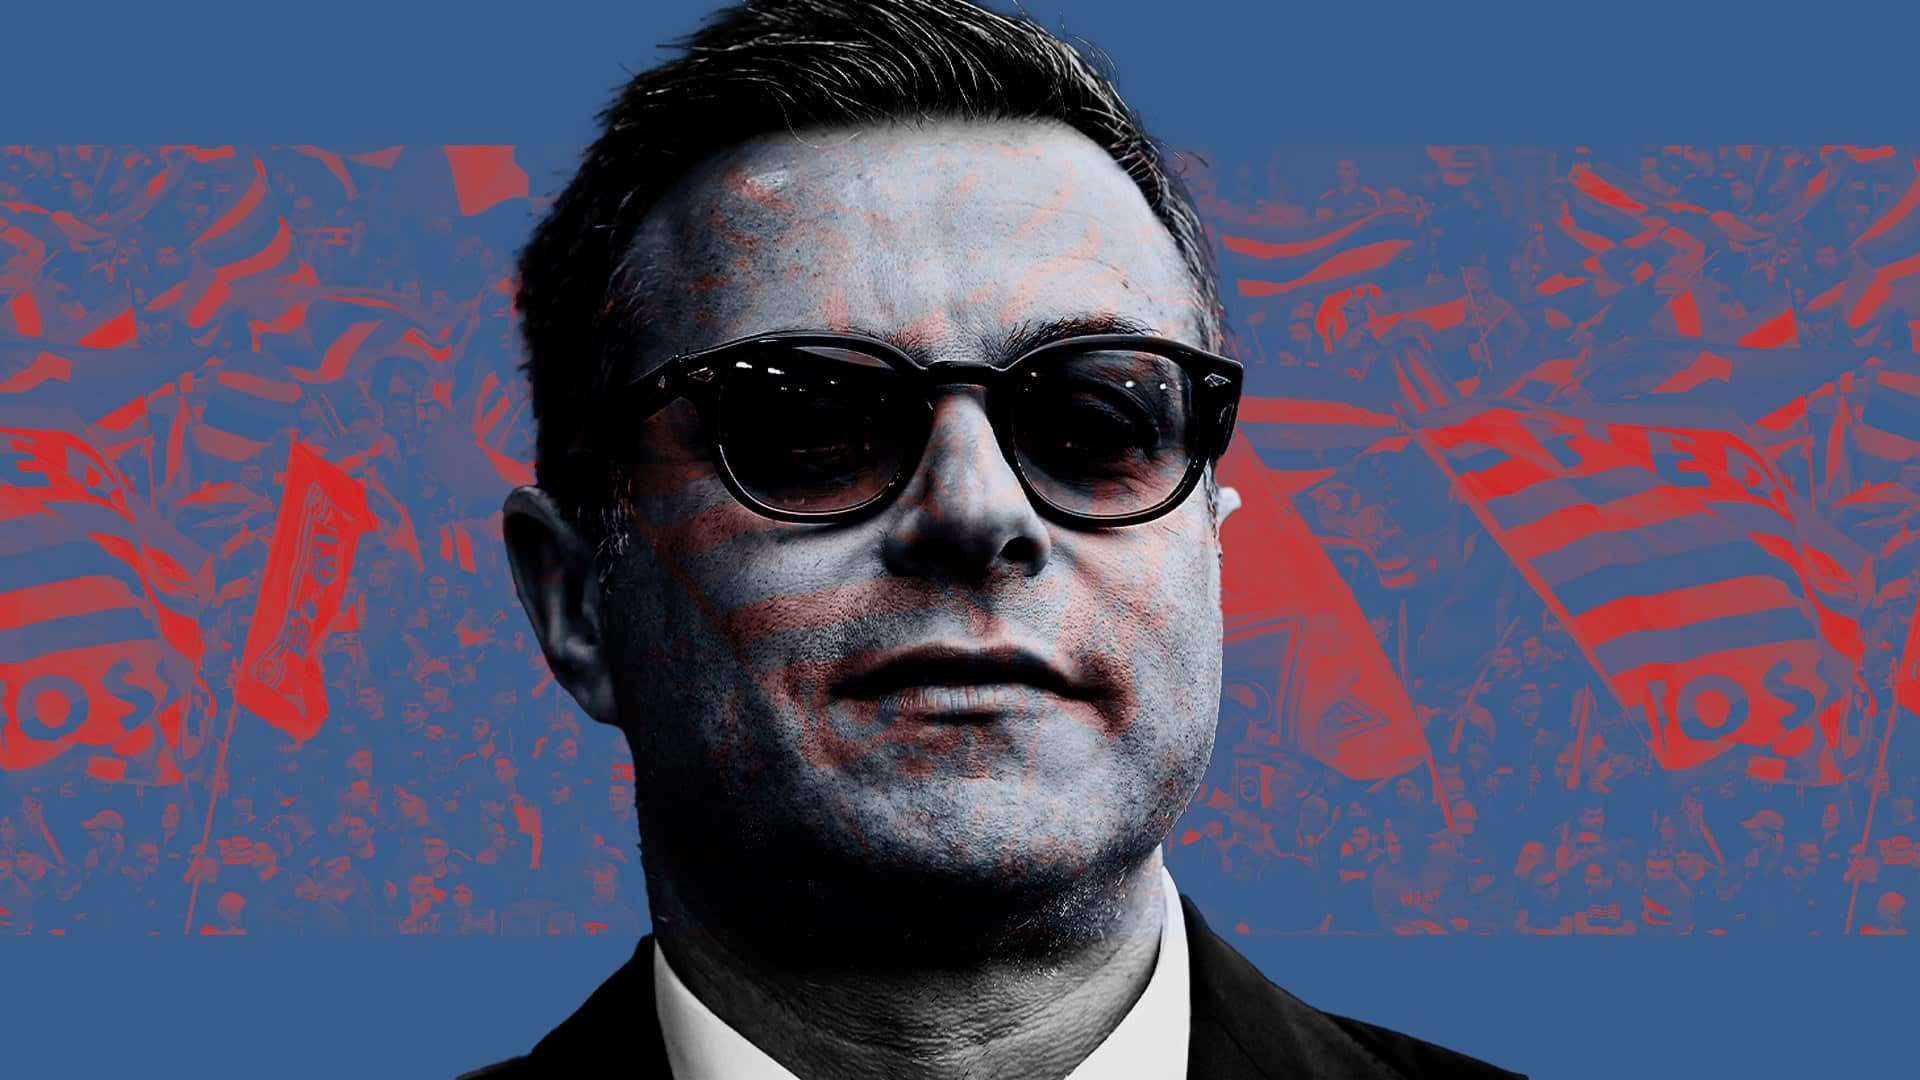 Andrea Radrizzani wearing sunglasses, set against a backdrop of Sampdoria fans who are understandably angry